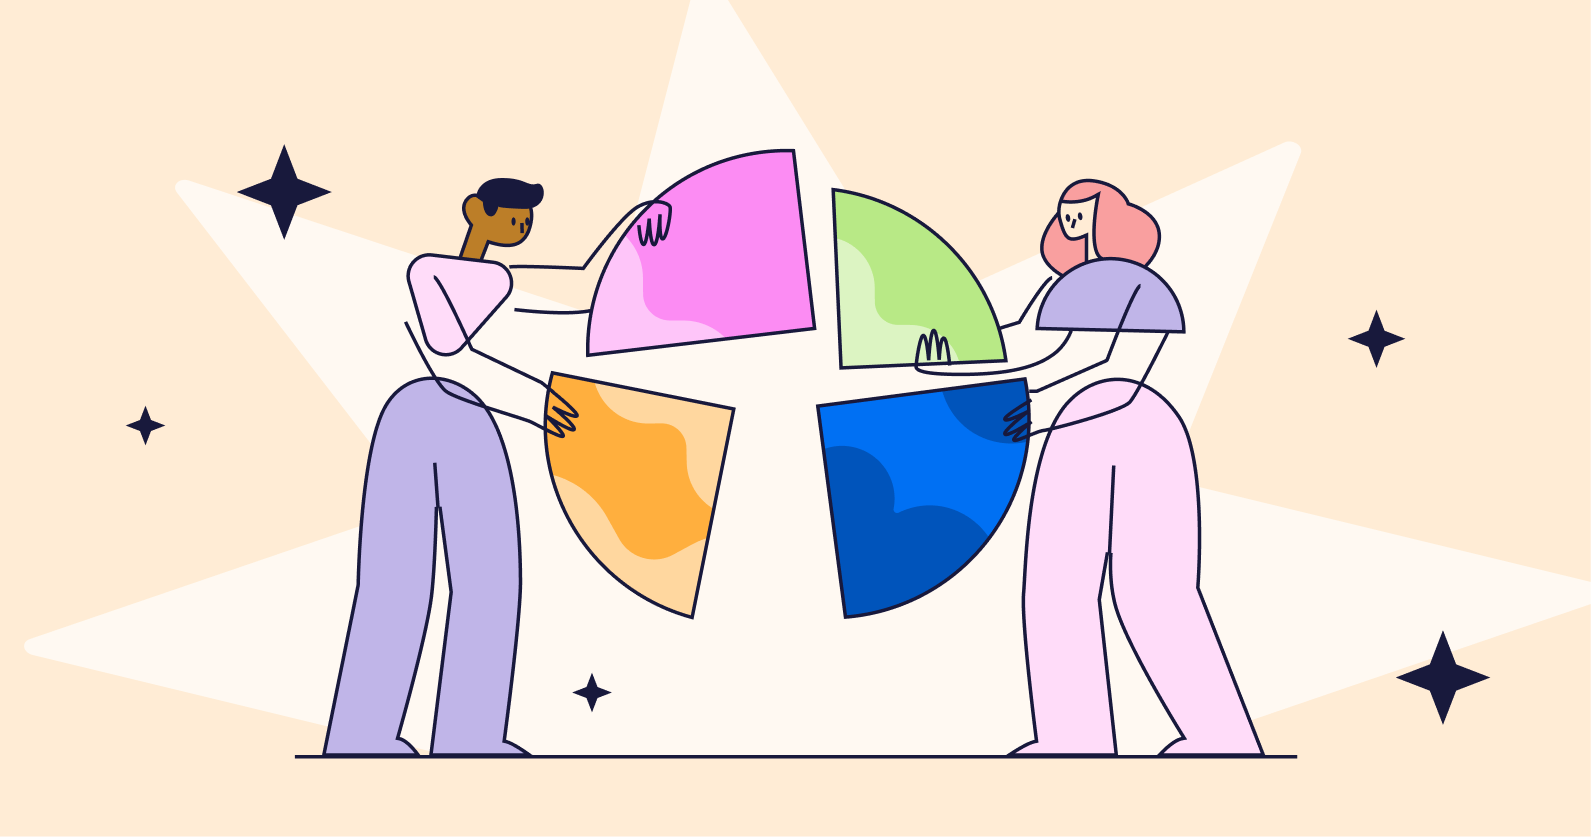 Illustration of two people putting puzzle pieces together.